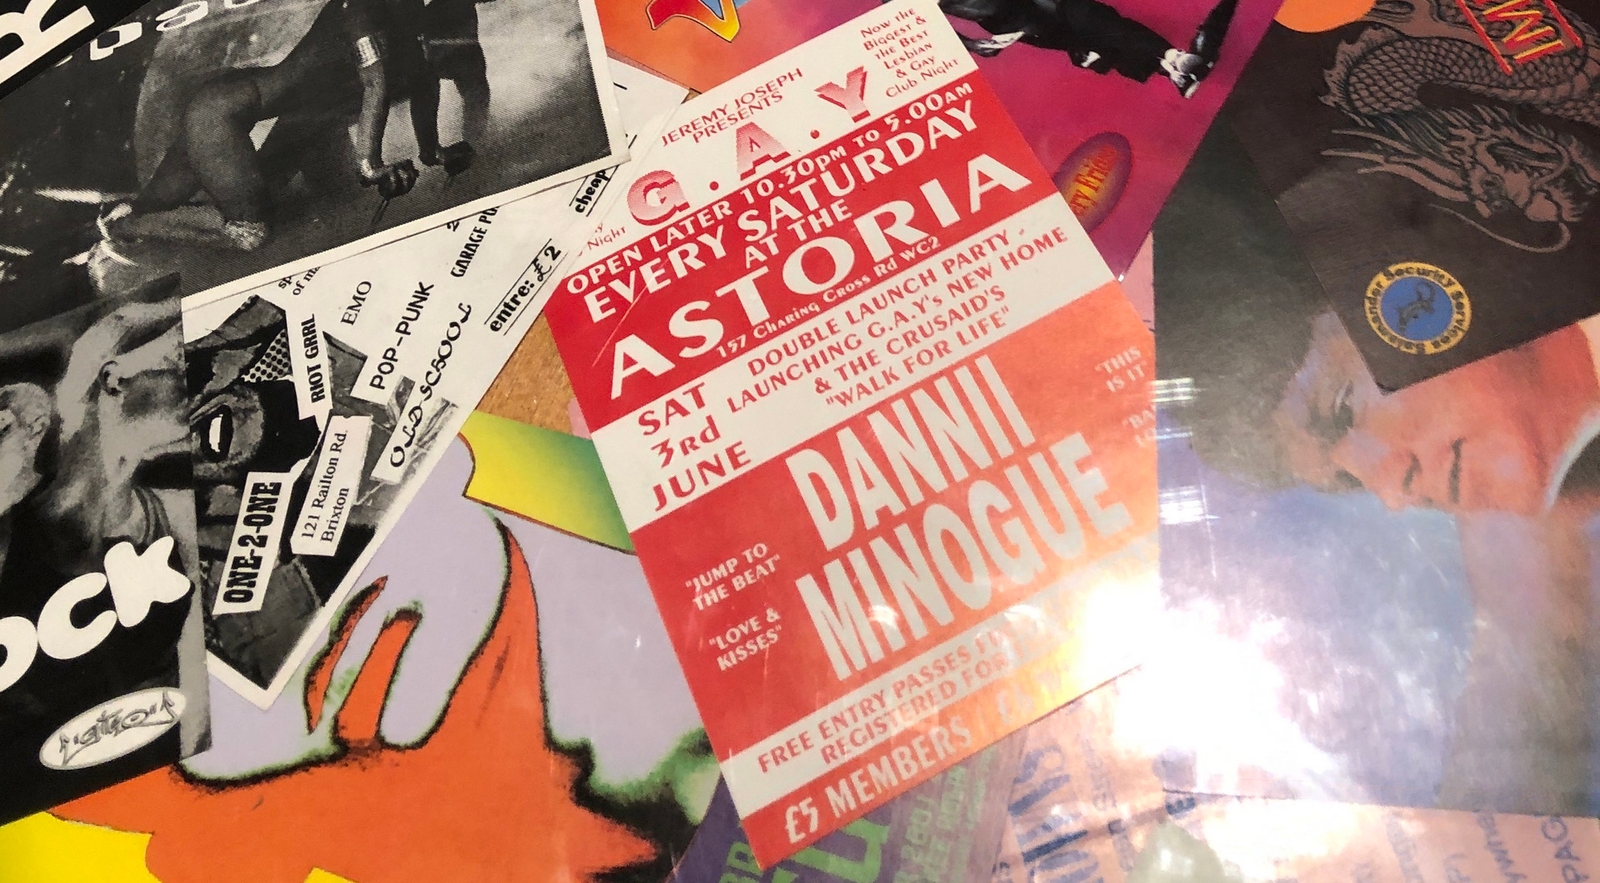 A collage of queer nightlife posters under a vitrine. Dannii Minogue's name is prominent